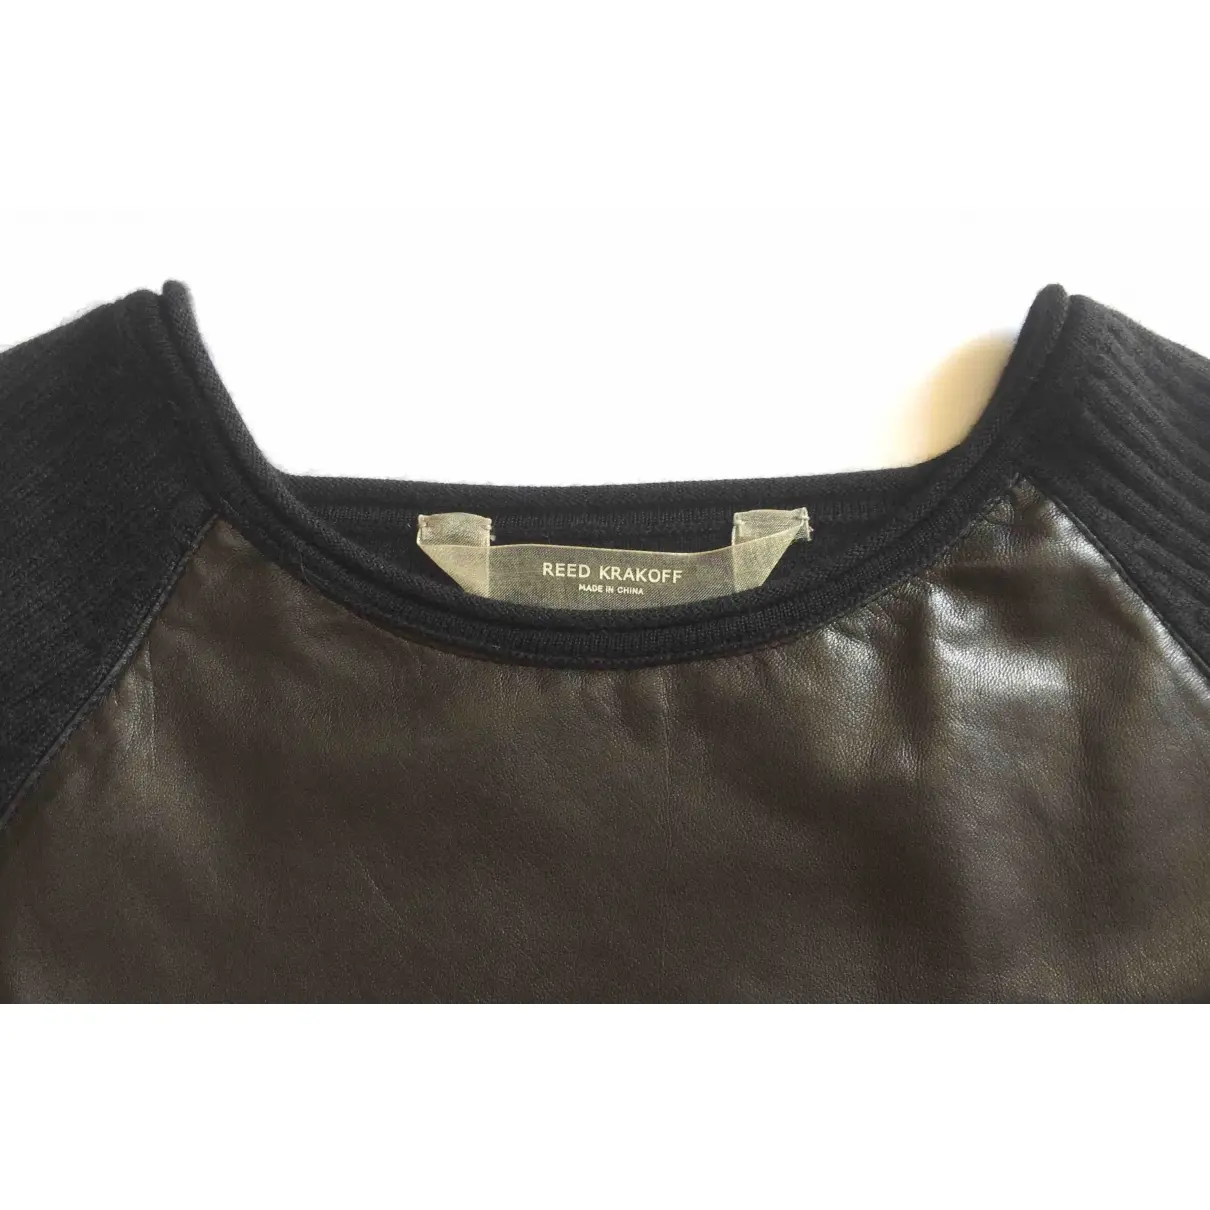 Buy Reed Krakoff Leather mid-length dress online